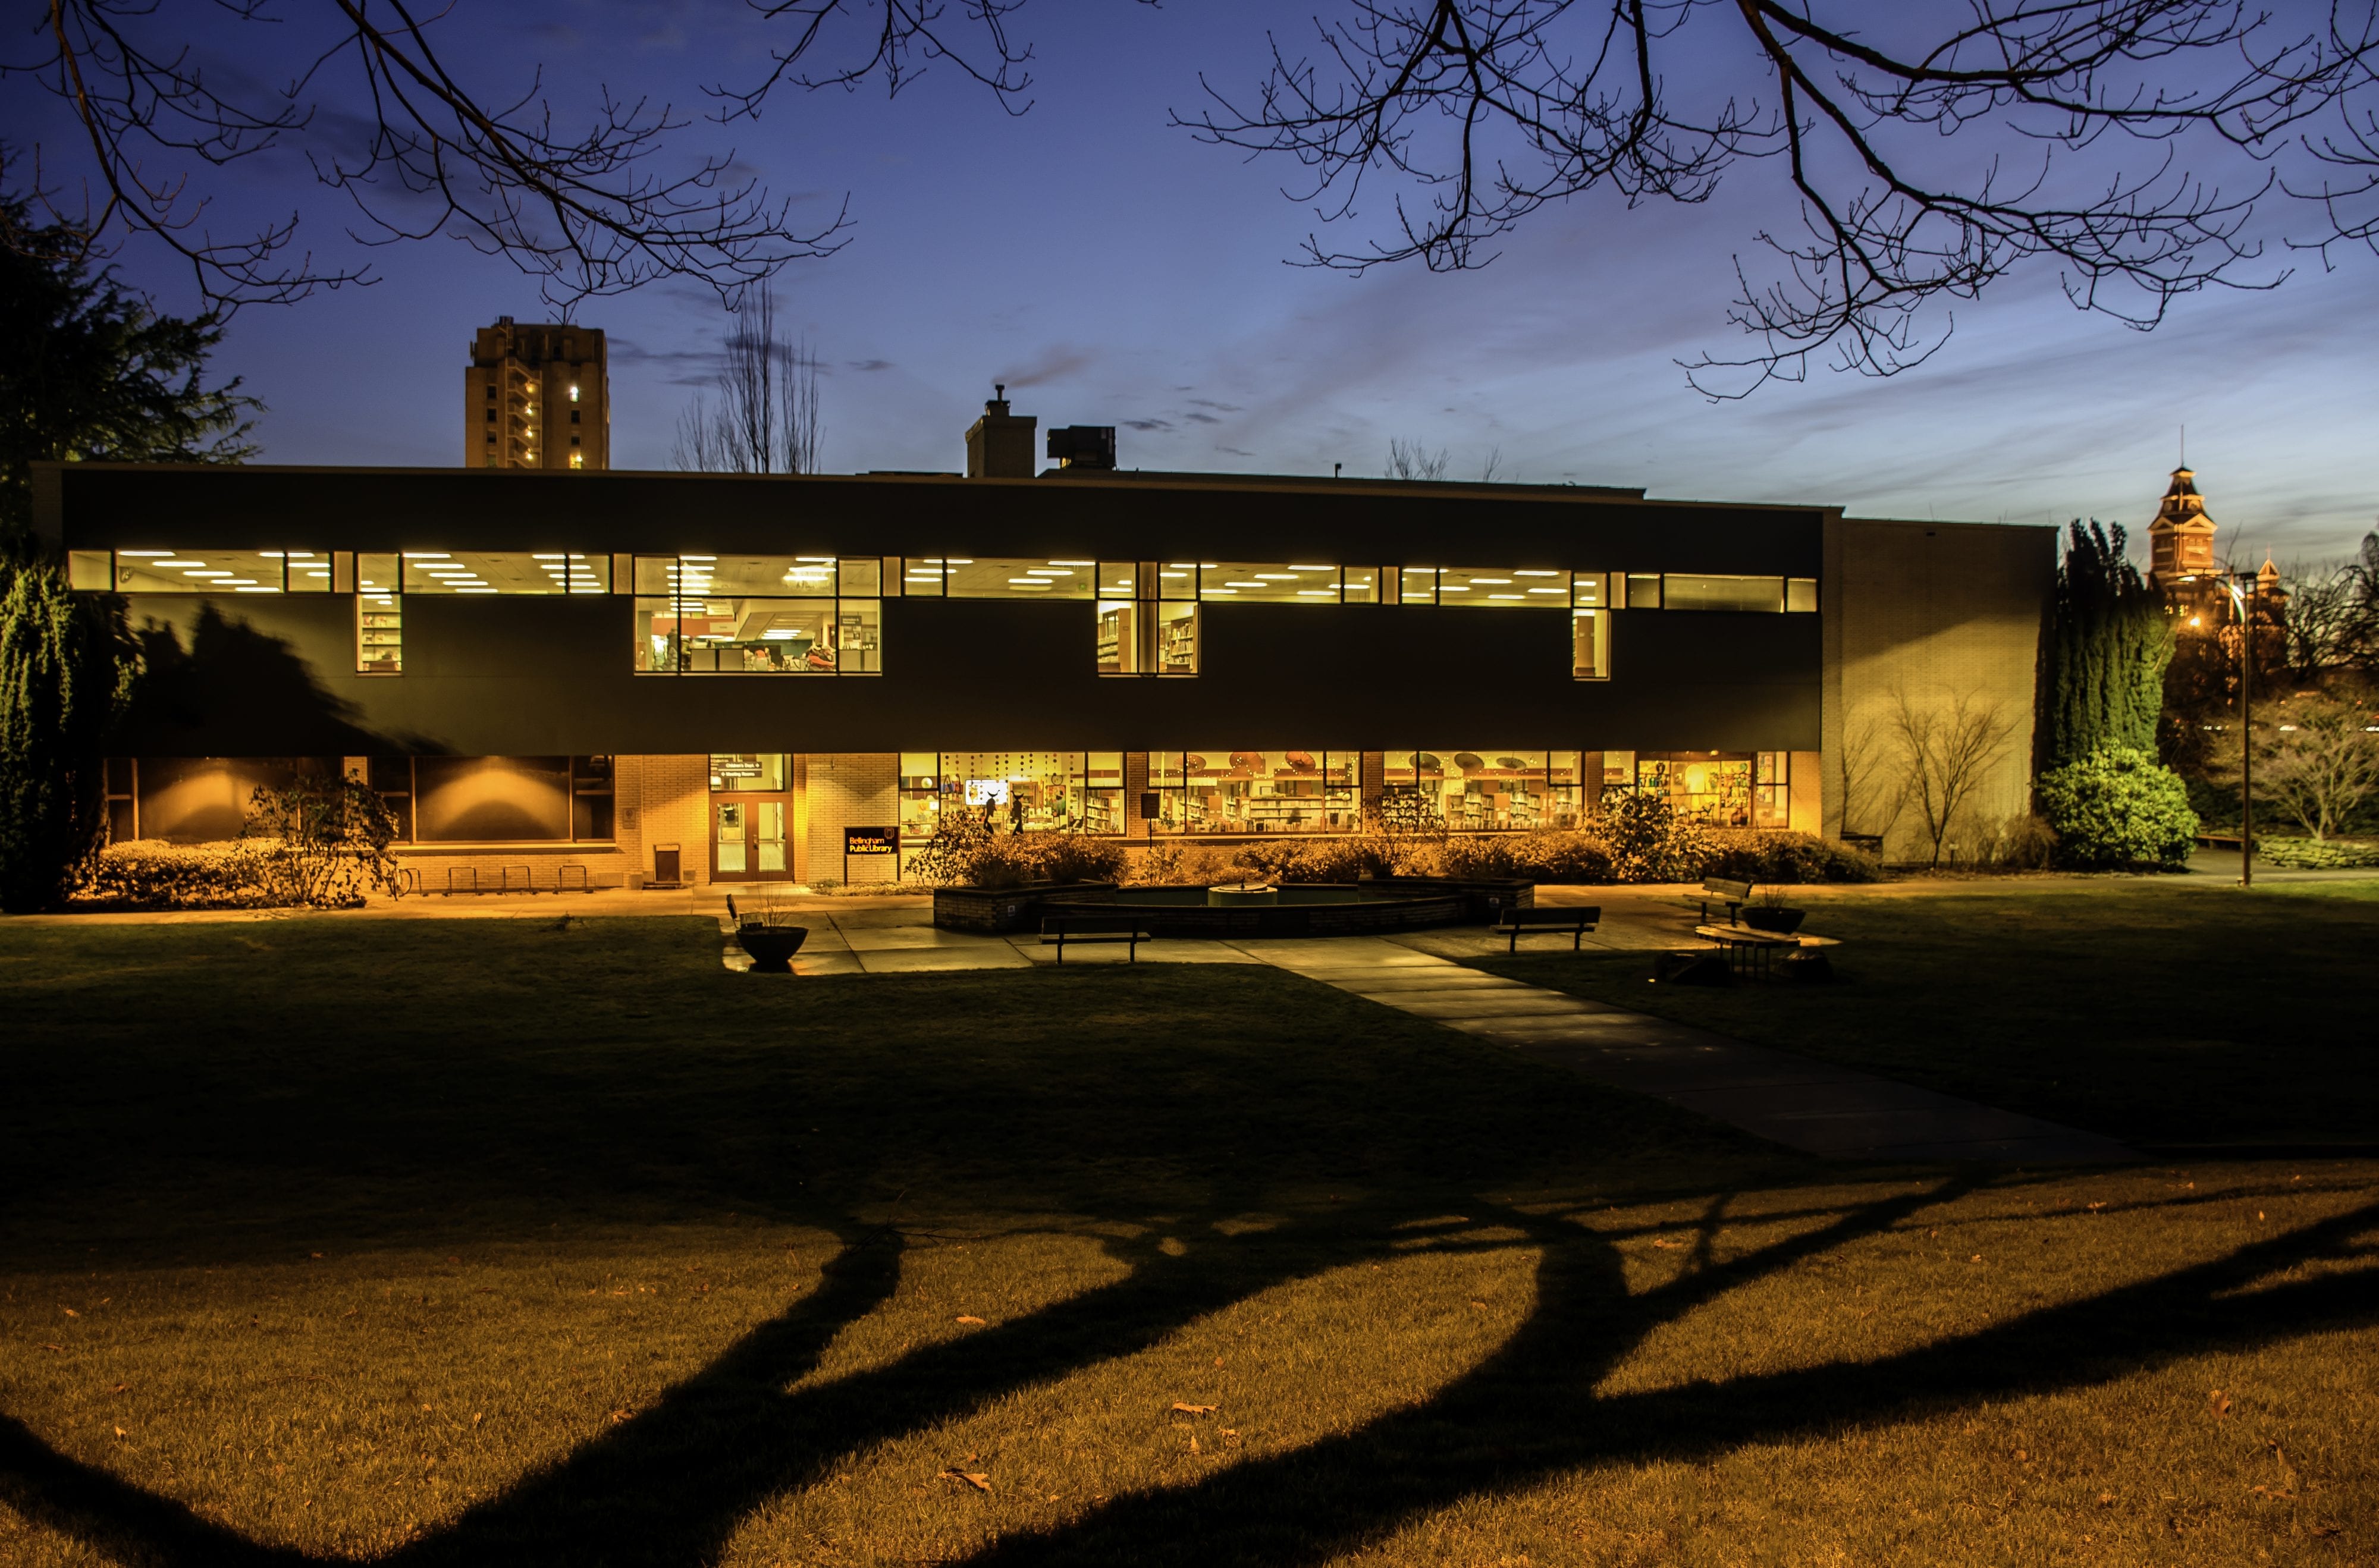 Library lawn and back of building at dusk